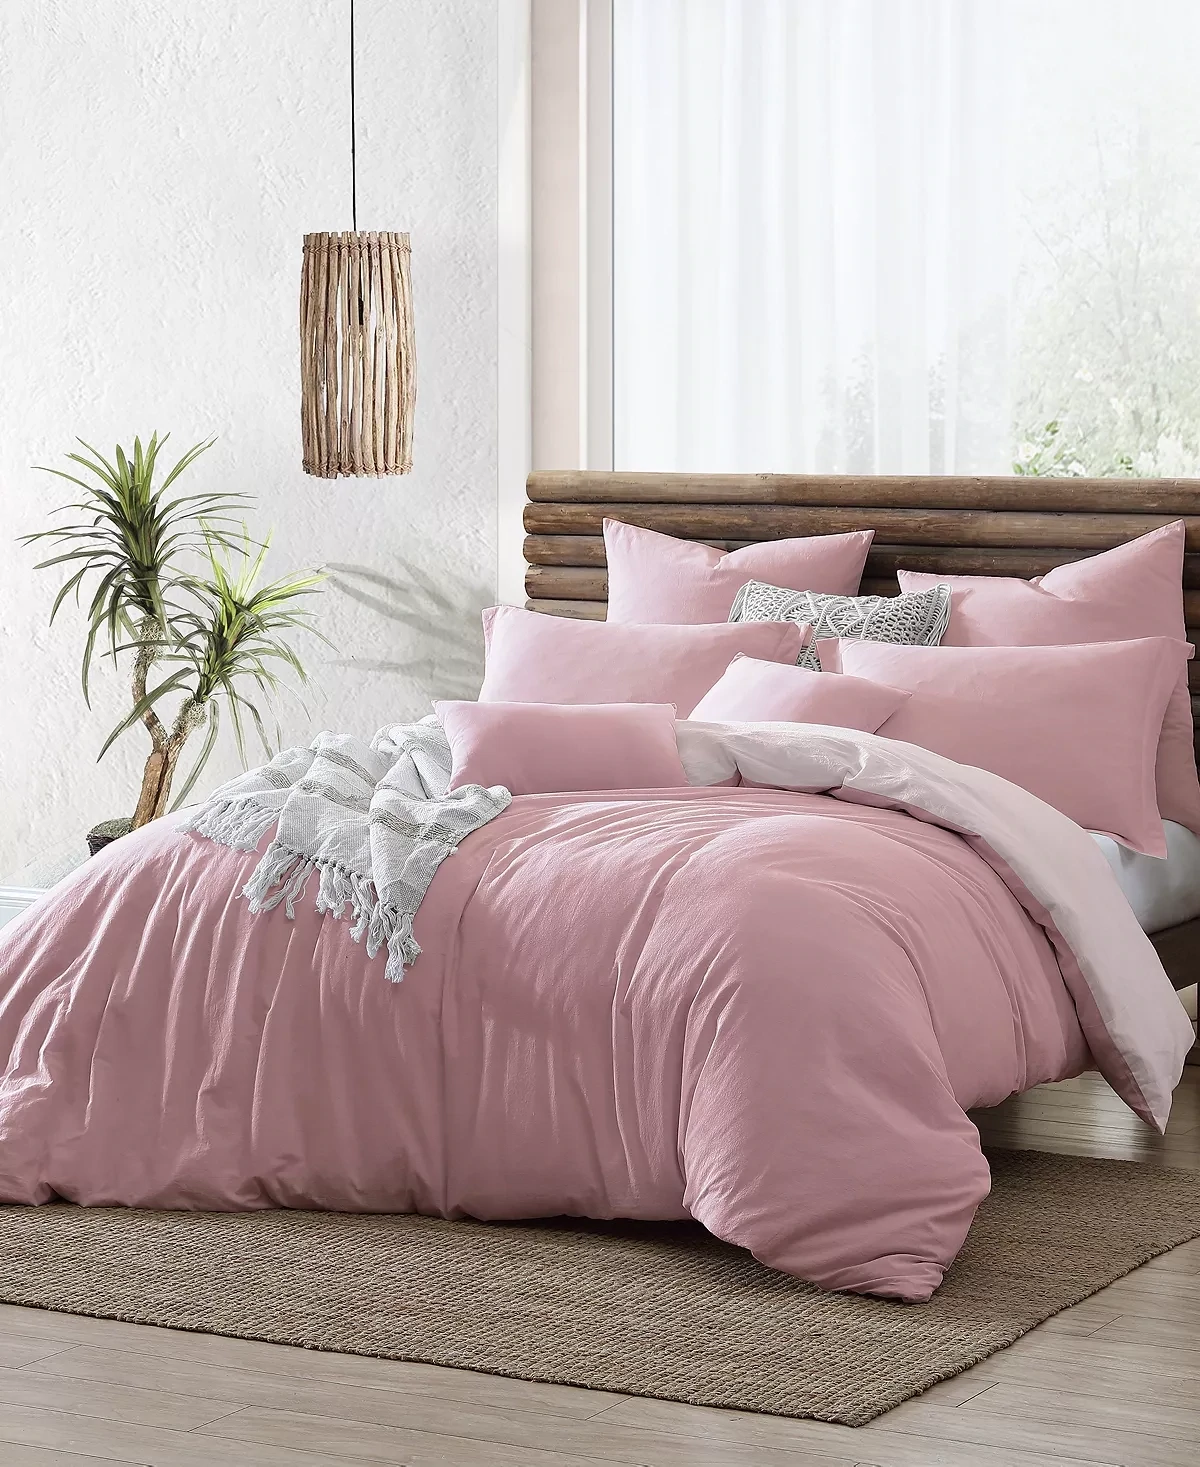 Swift Home Valatie Garment Dyed Duvet Cover Set with Shams, Pink, Full/Queen